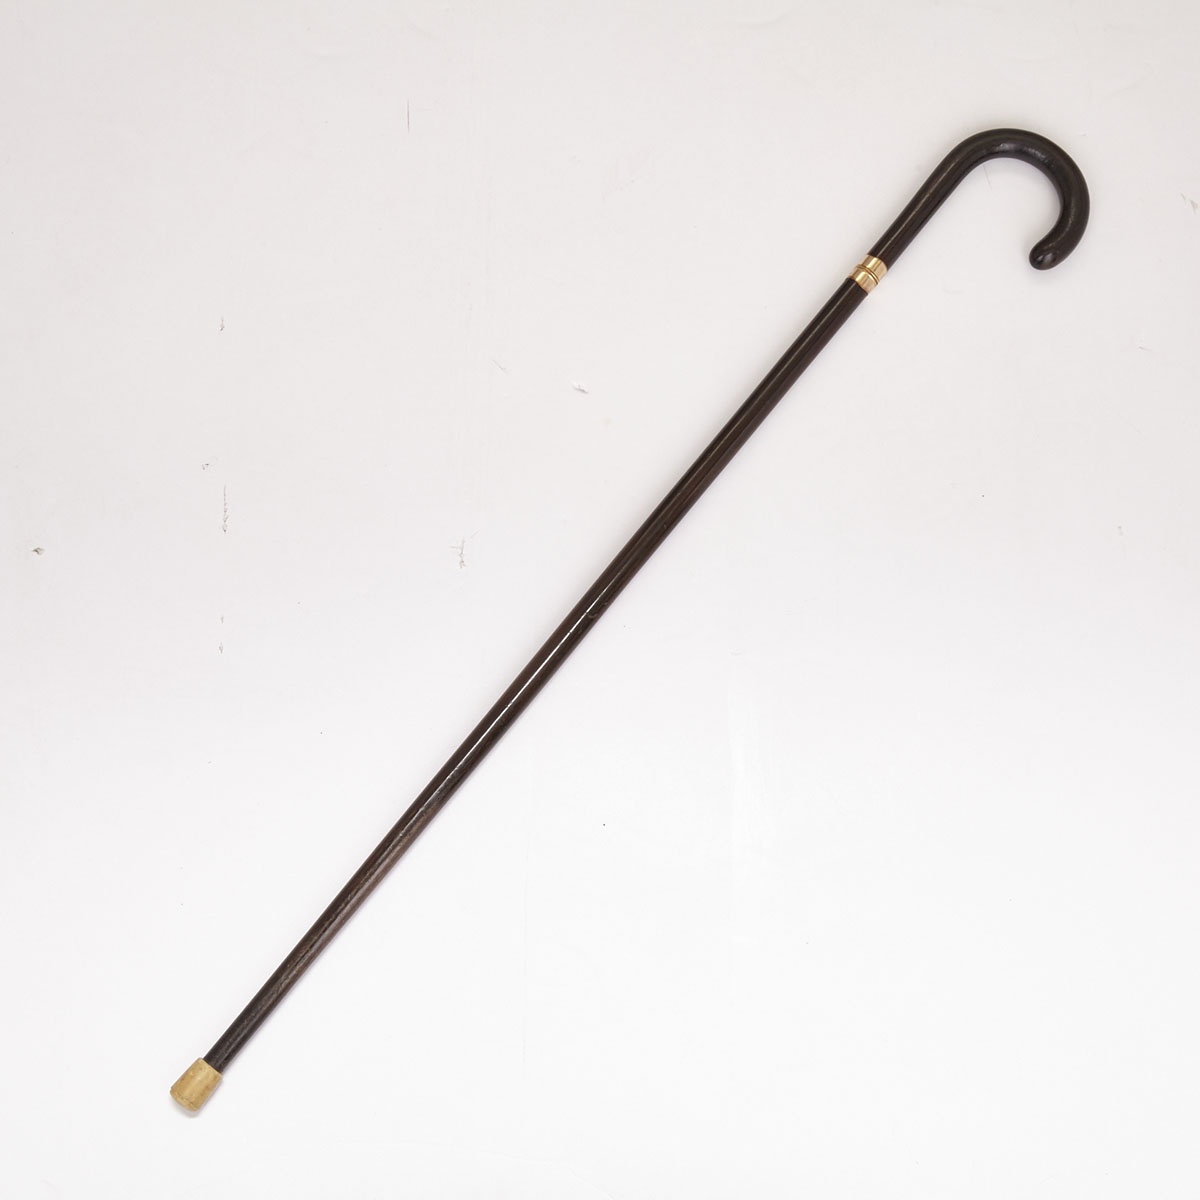 French Rosewood Life Preserver Gadget Cane, 19th century